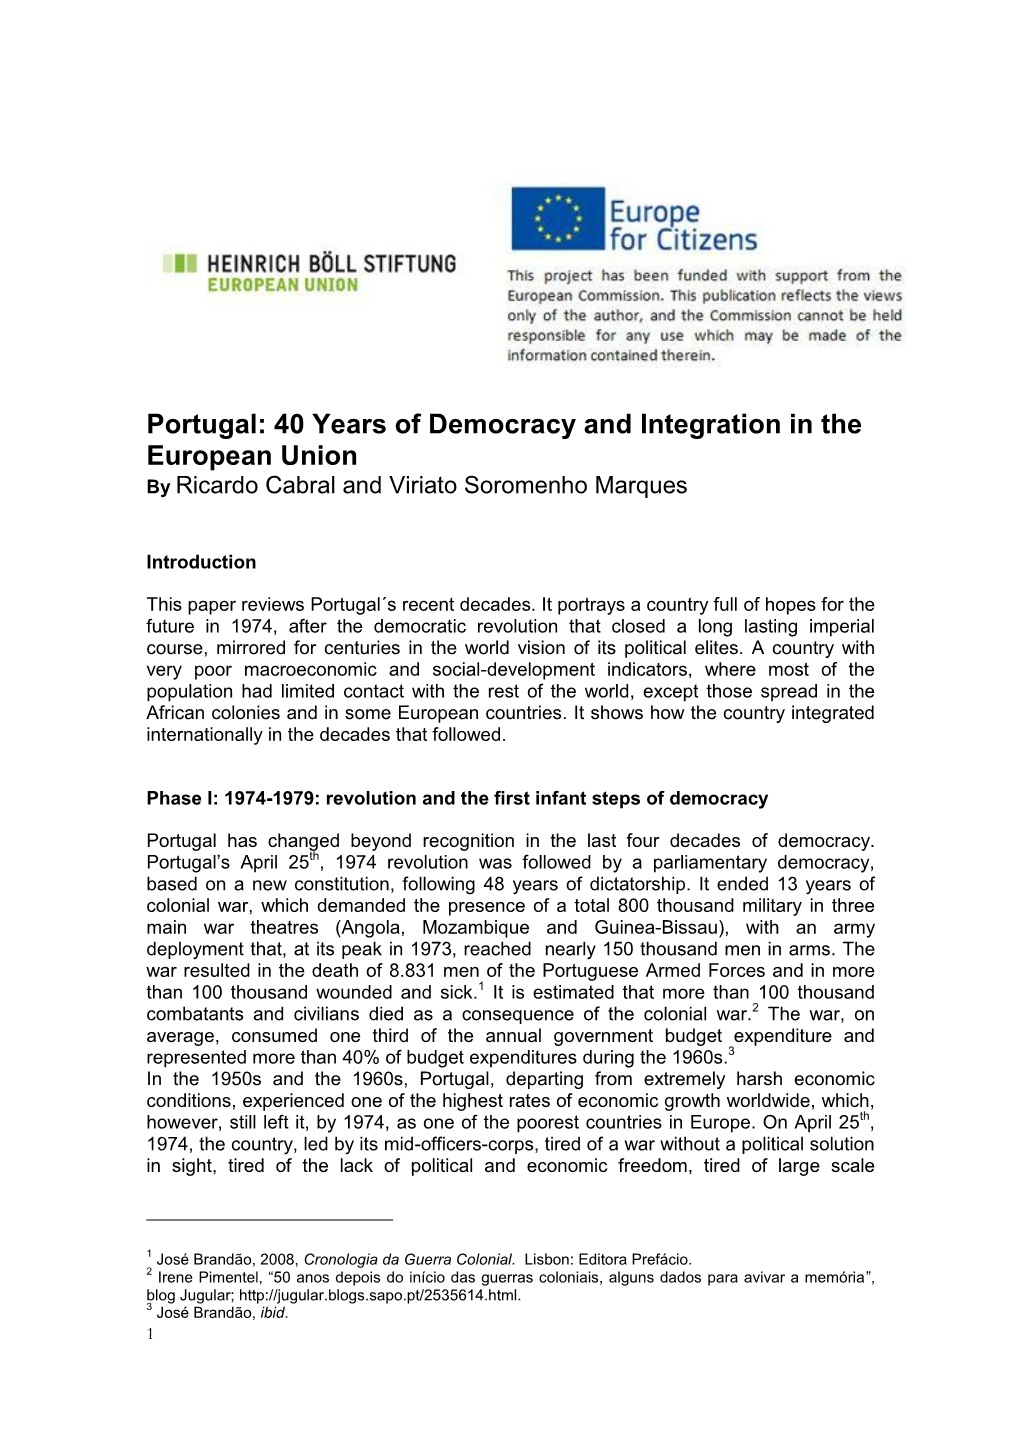 Portugal: 40 Years of Democracy and Integration in the European Union by Ricardo Cabral and Viriato Soromenho Marques